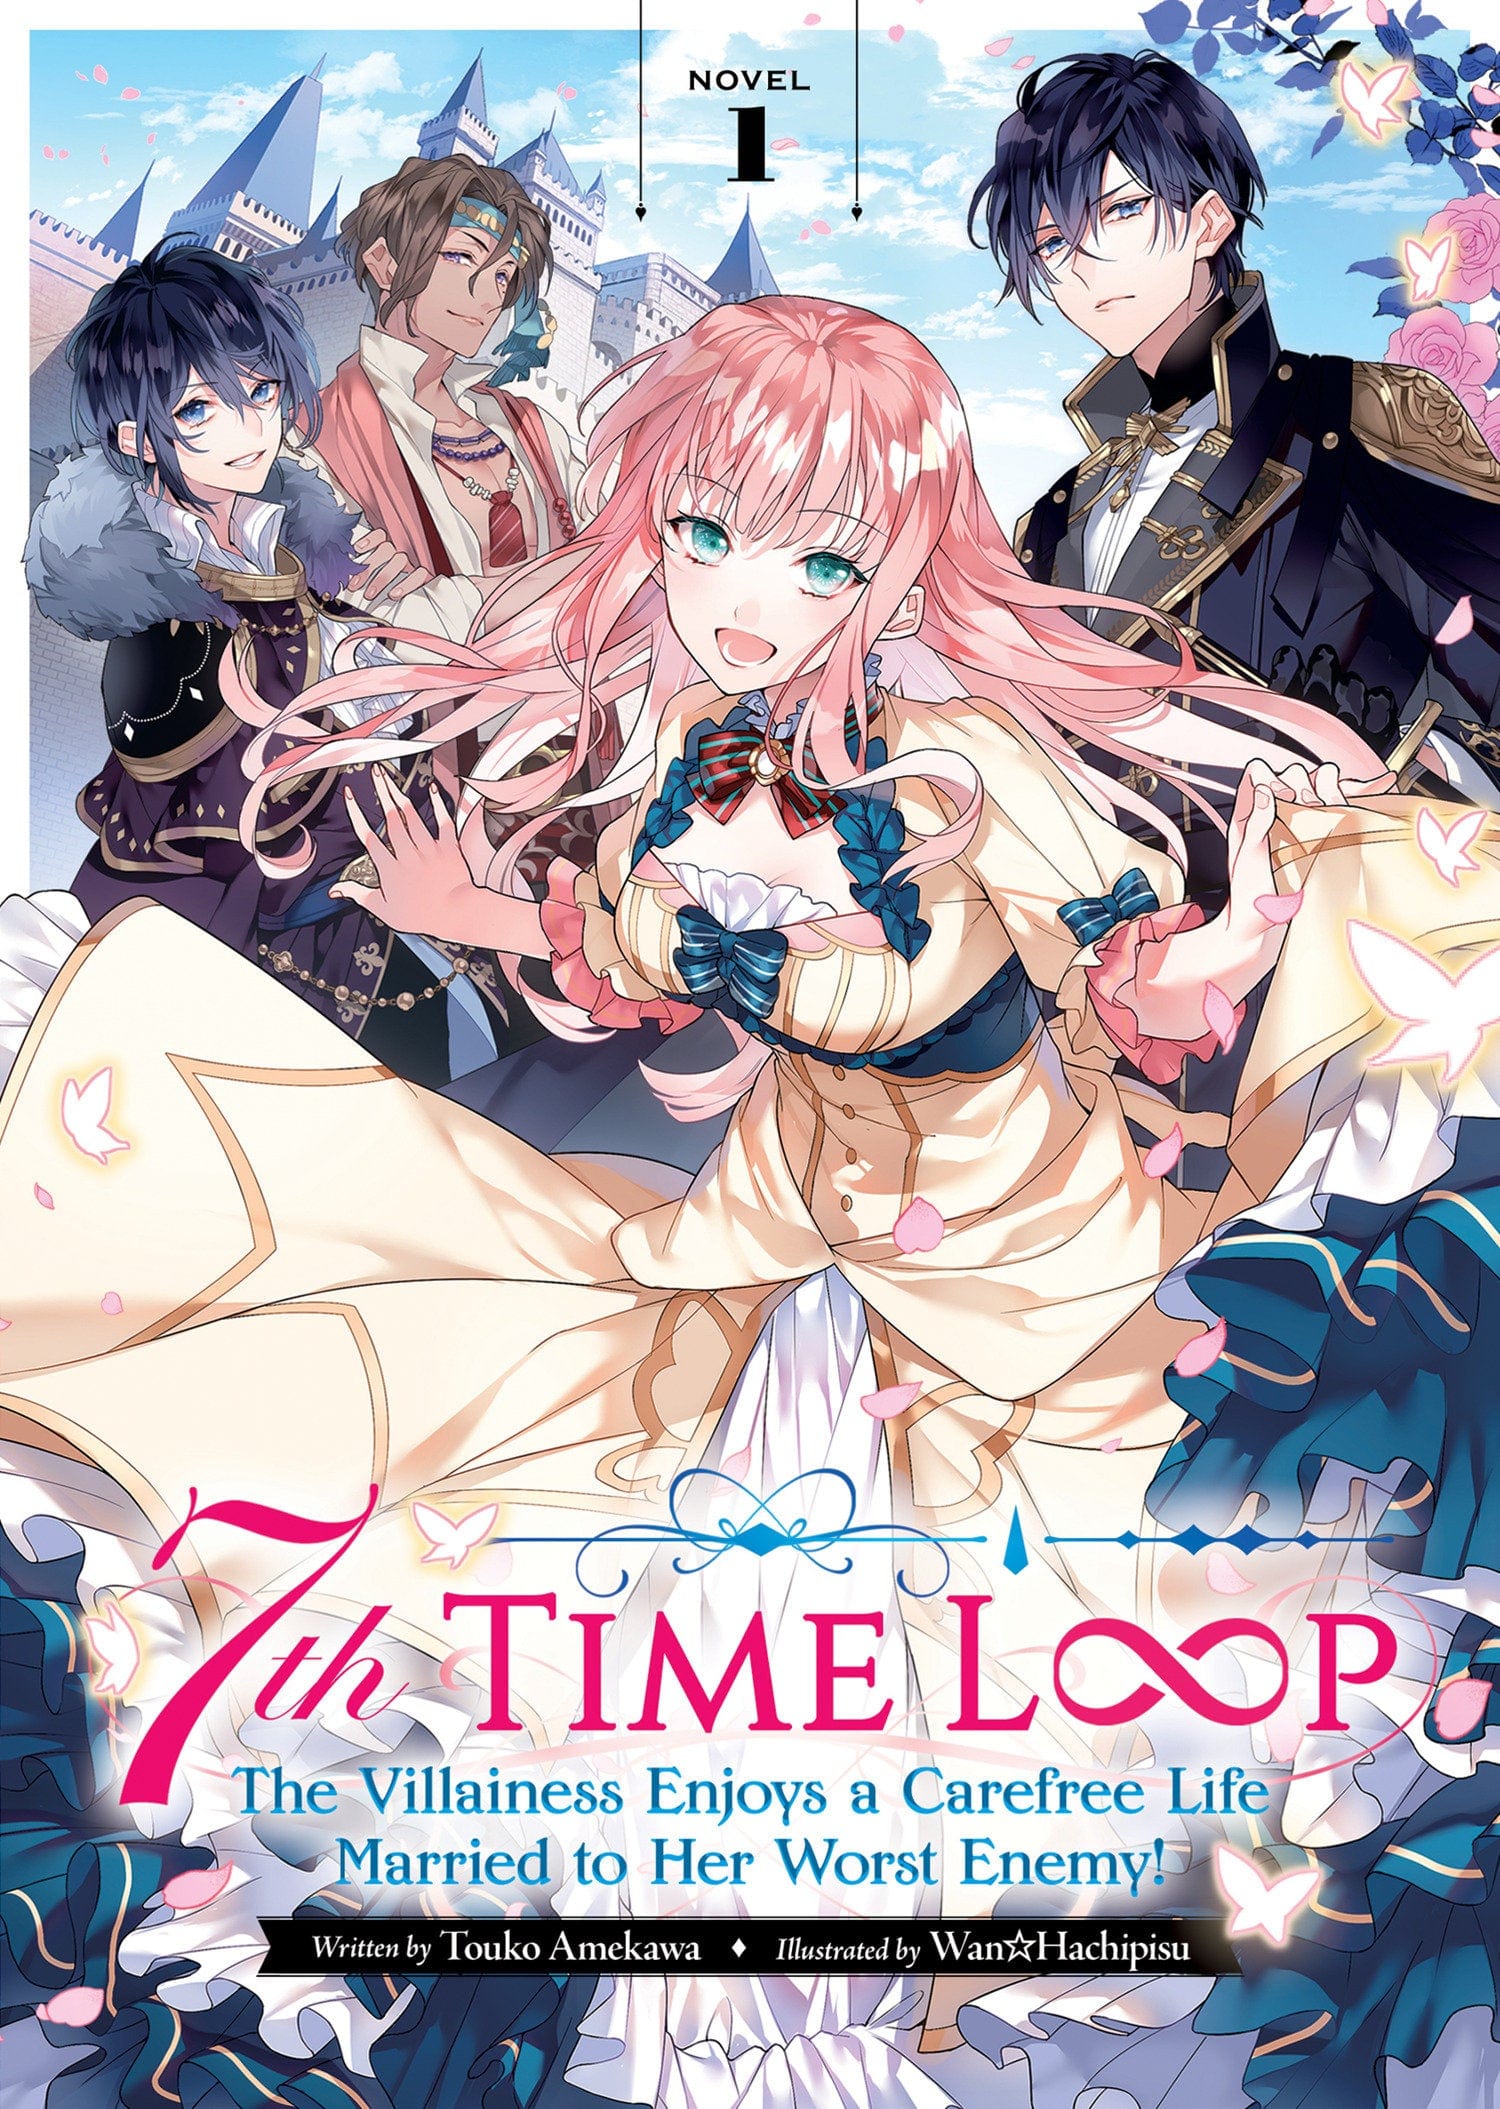 7th Time Loop: Villainess Enjoys A Carefree Life Married To Her Worst Enemy! (Light Novel) Vol. 1 - Third Eye